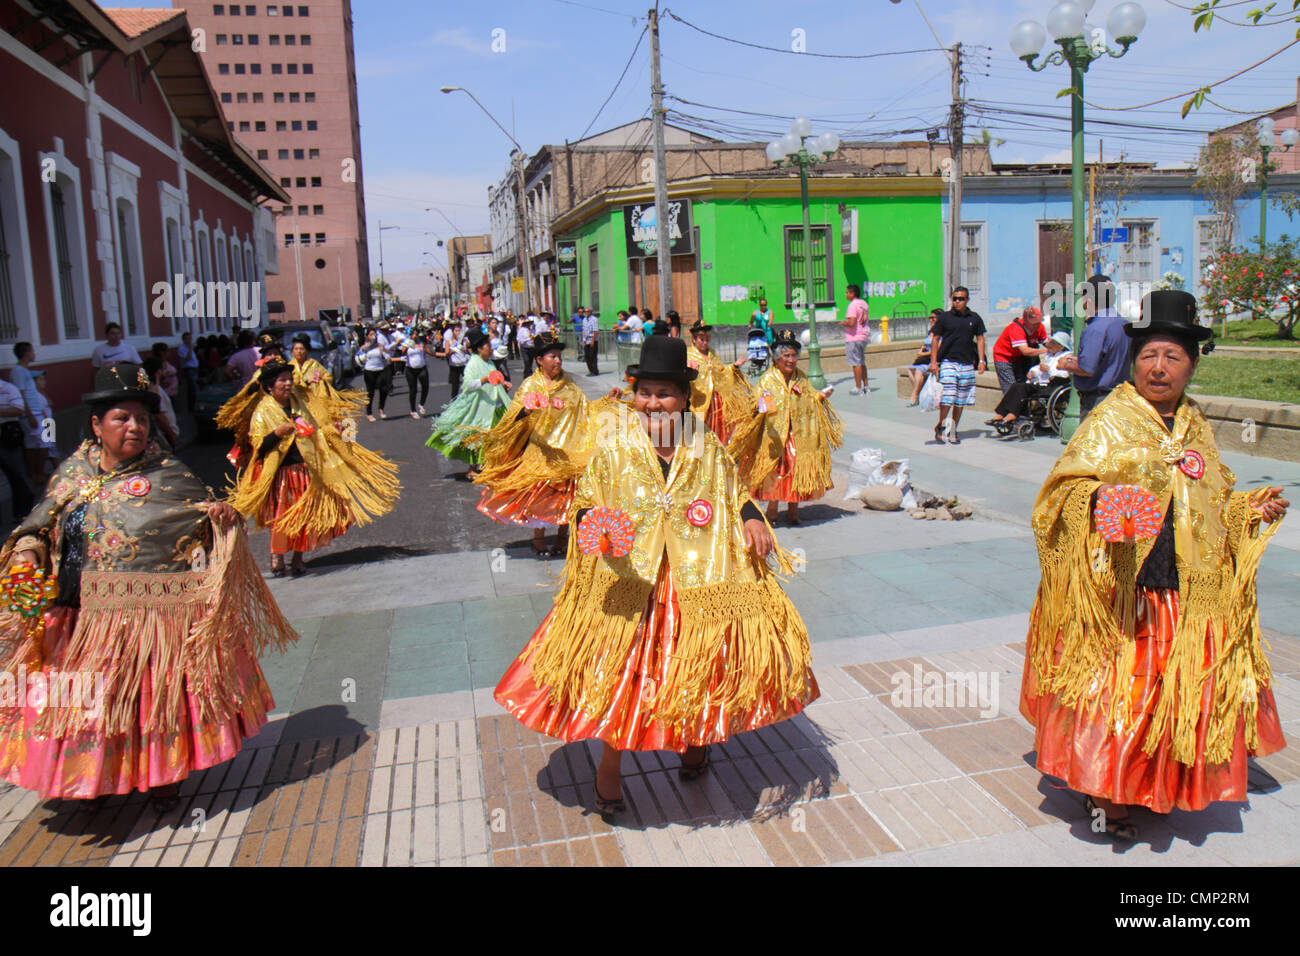 Arica Chile,Plaza Colon,Carnaval Andino,Andean Carnival,parade,indigenous,Aymara heritage,folklore traditional dance,troupe,Hispanic woman female wome Stock Photo